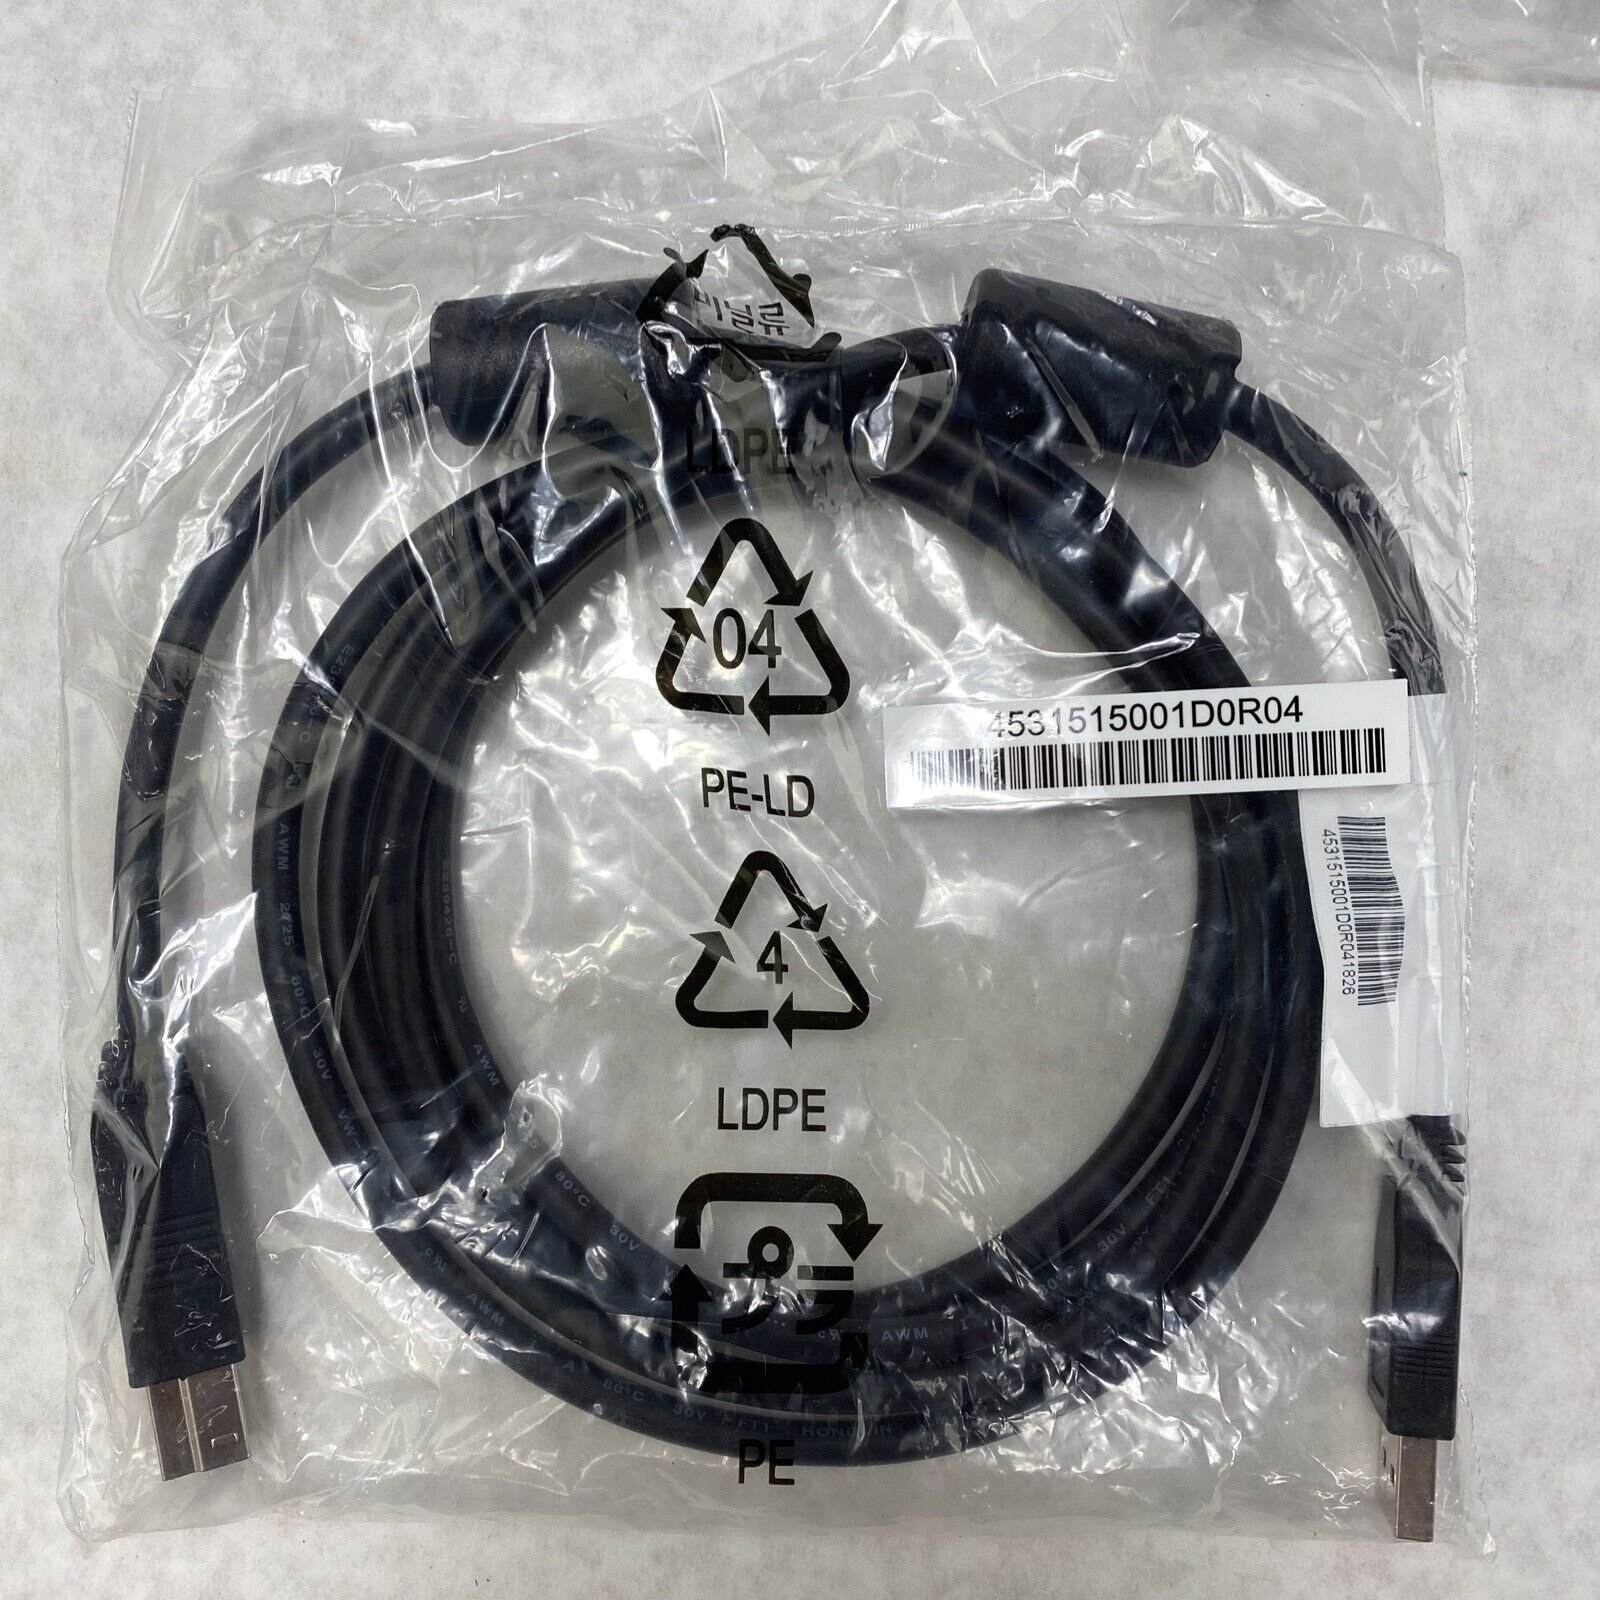 Lot(5) Genuine HP 917468 SS USB 3.0 Cable A-Male to B-Male 6ft Black